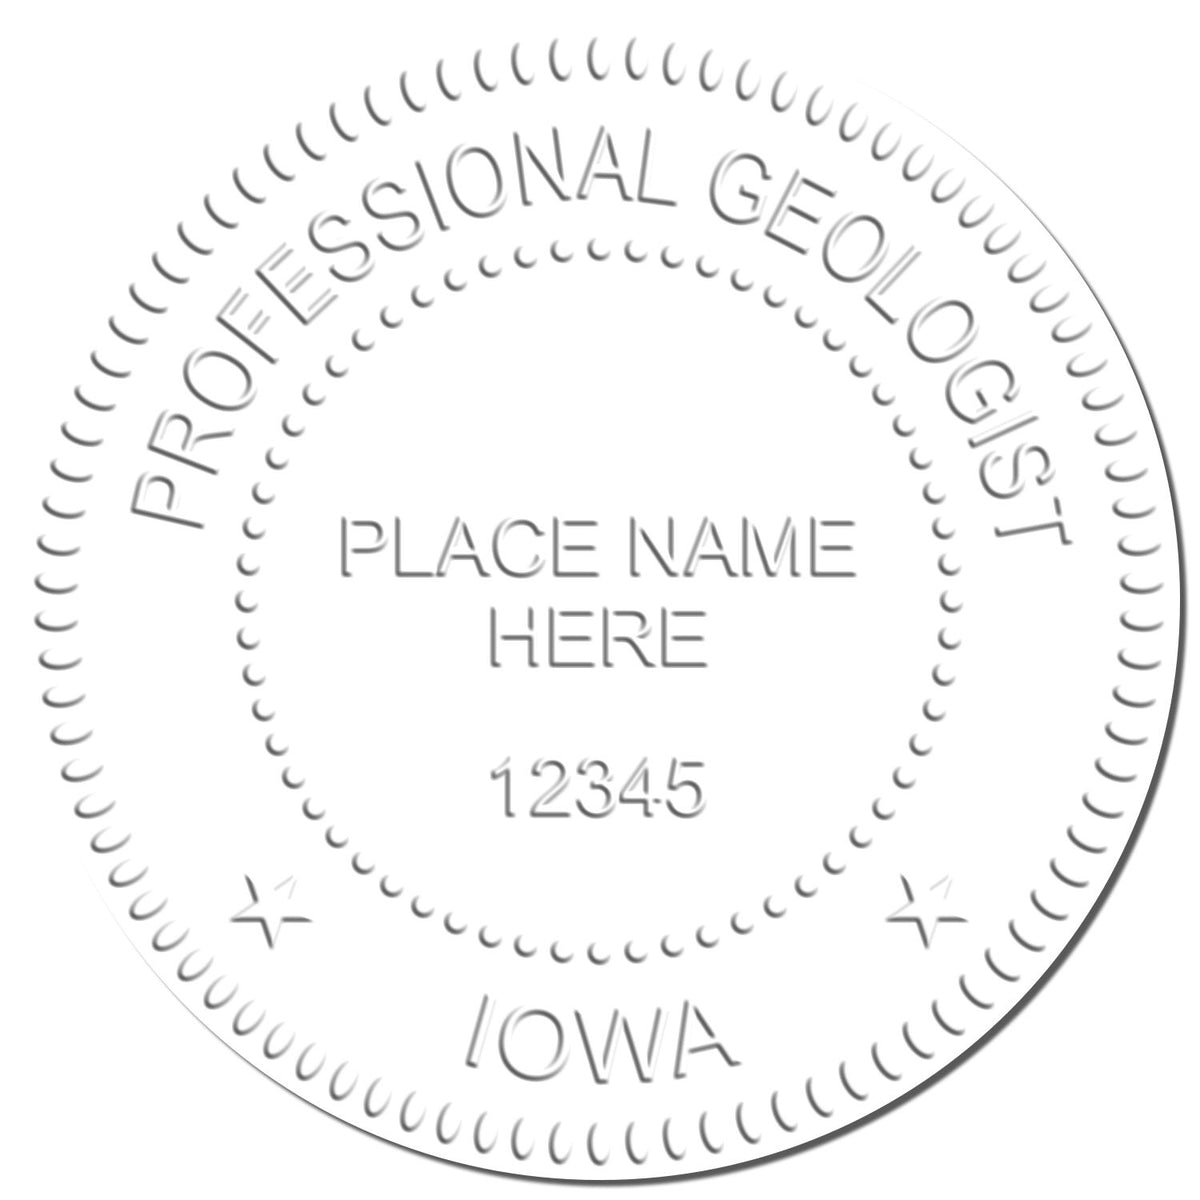 A stamped imprint of the Soft Iowa Professional Geologist Seal in this stylish lifestyle photo, setting the tone for a unique and personalized product.